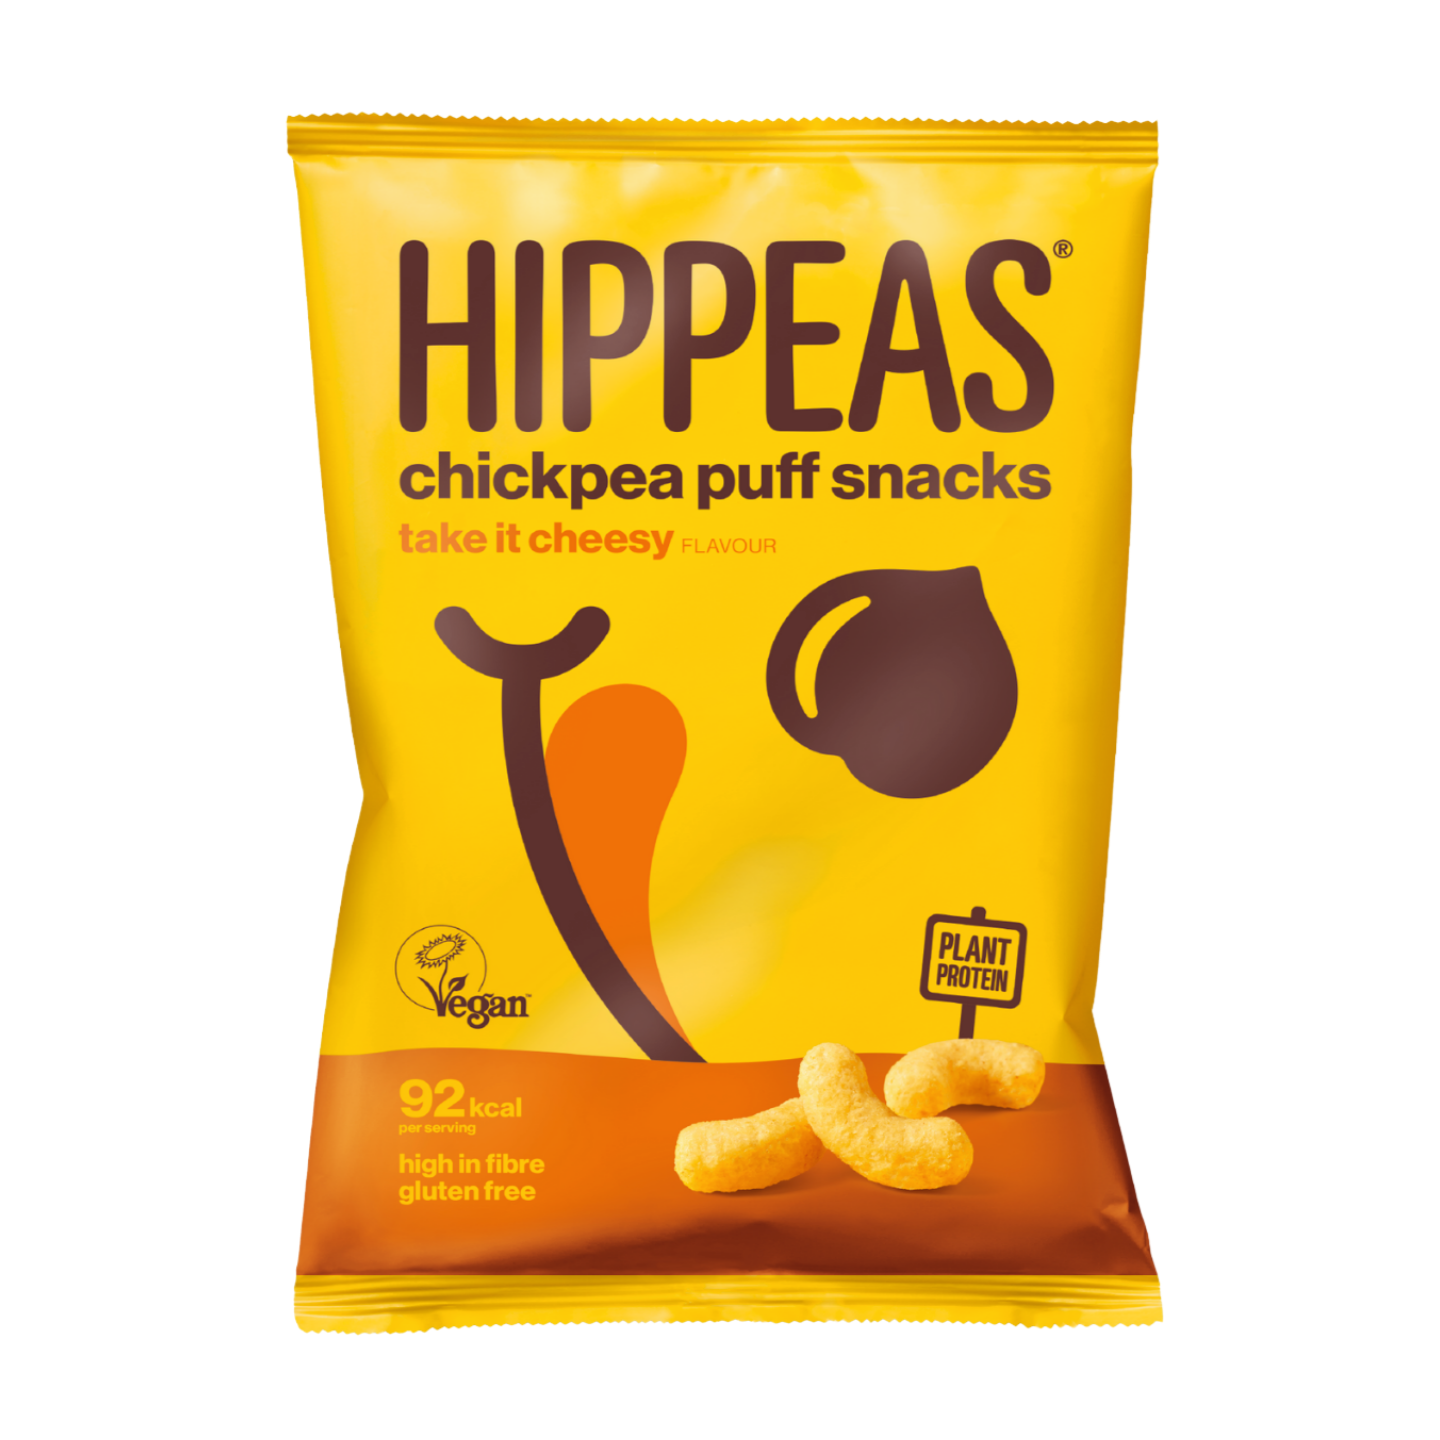 Hippeas Take it Cheesy Chickpea Puffs (22g)